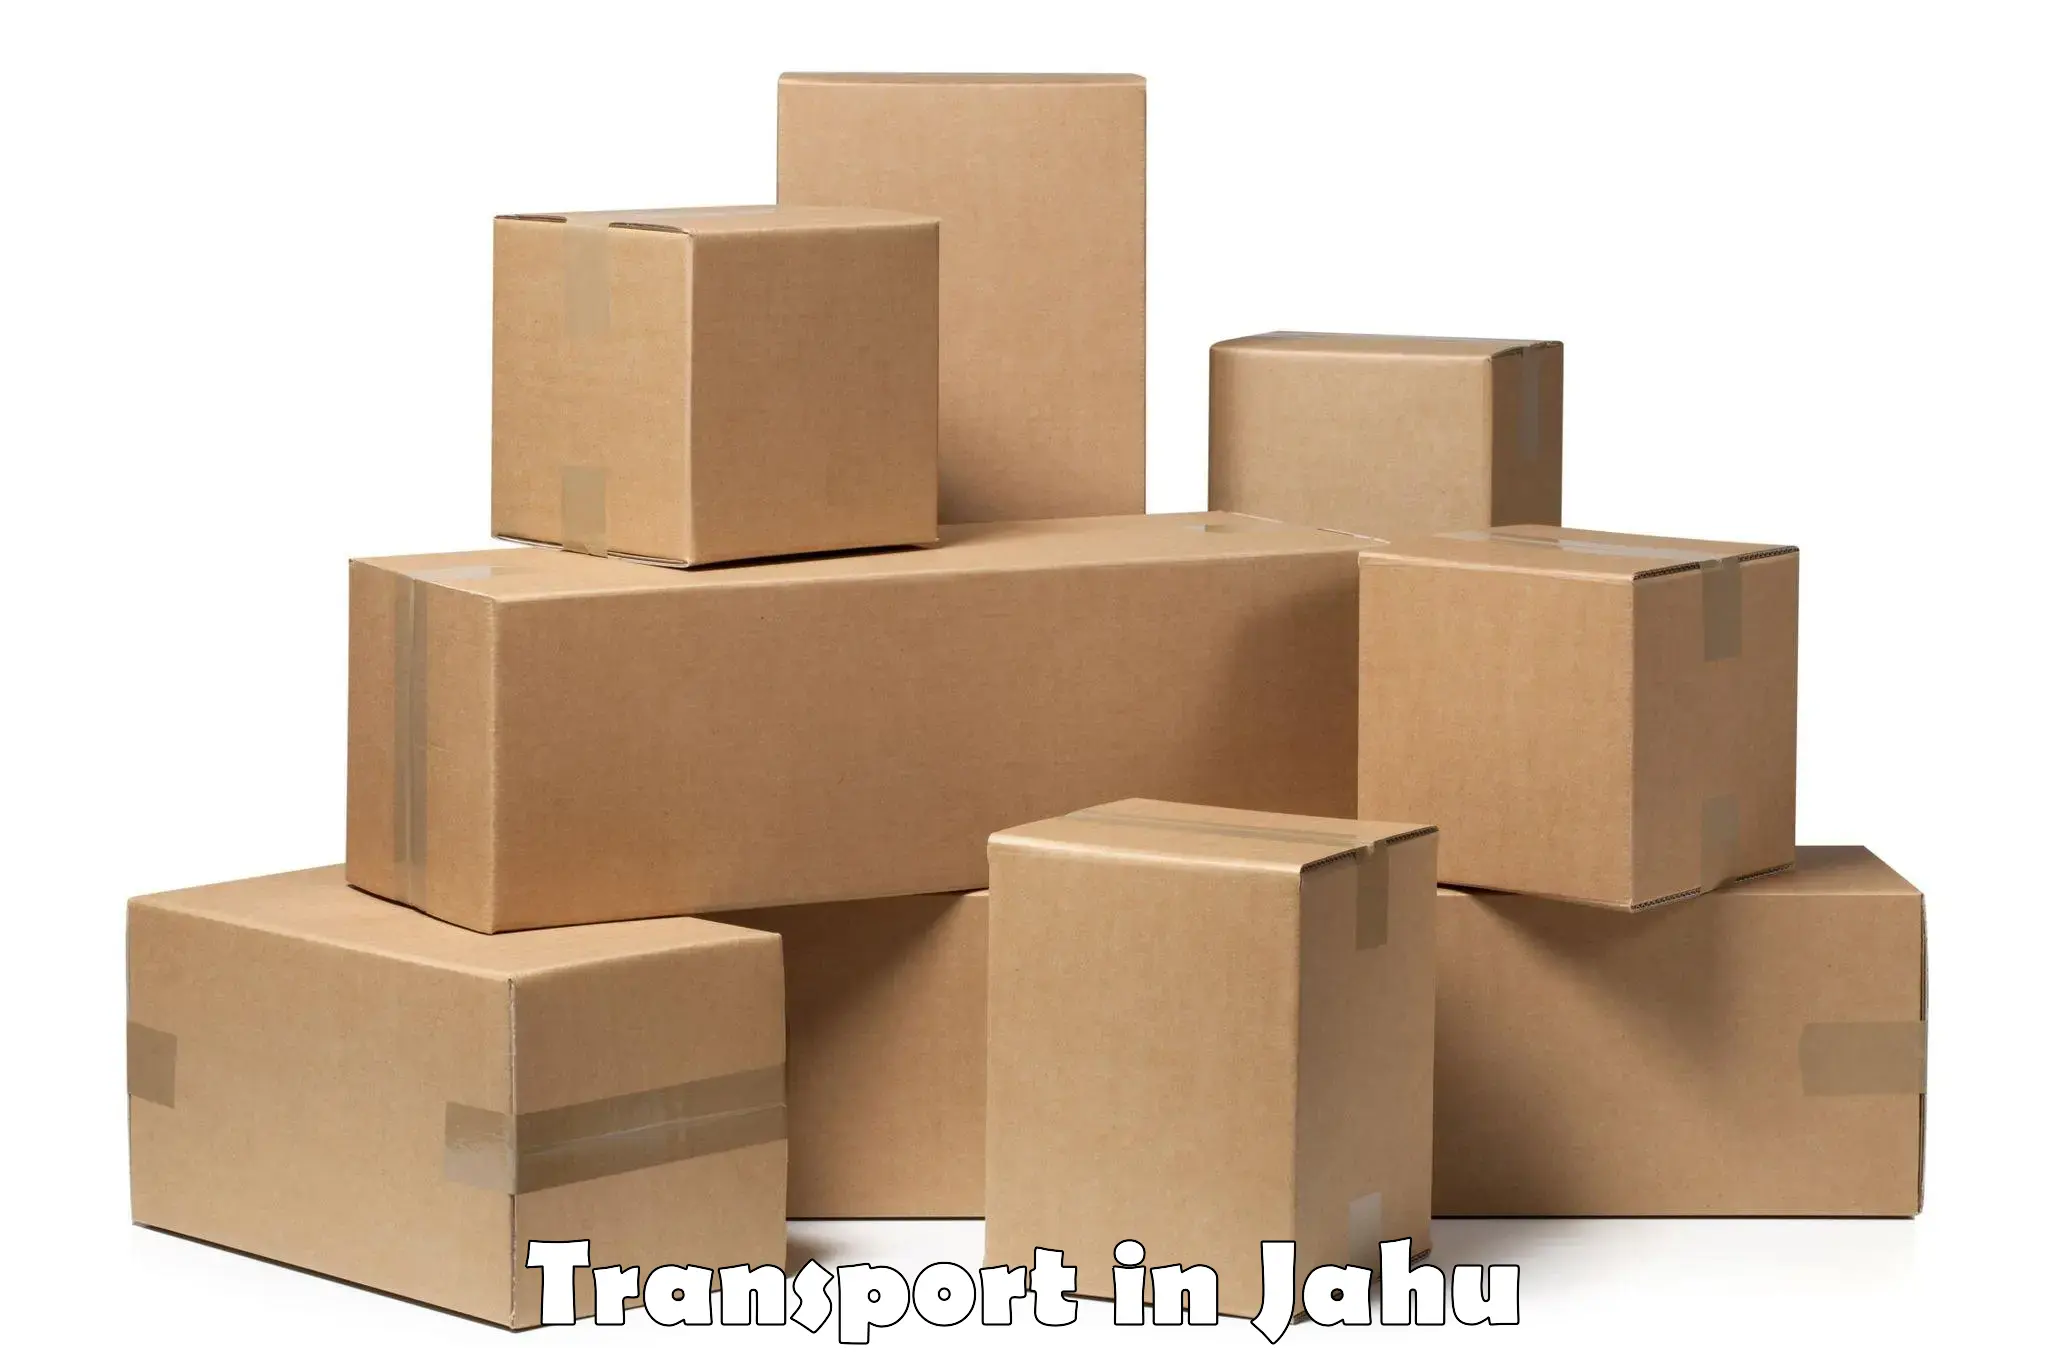 Daily parcel service transport in Jahu